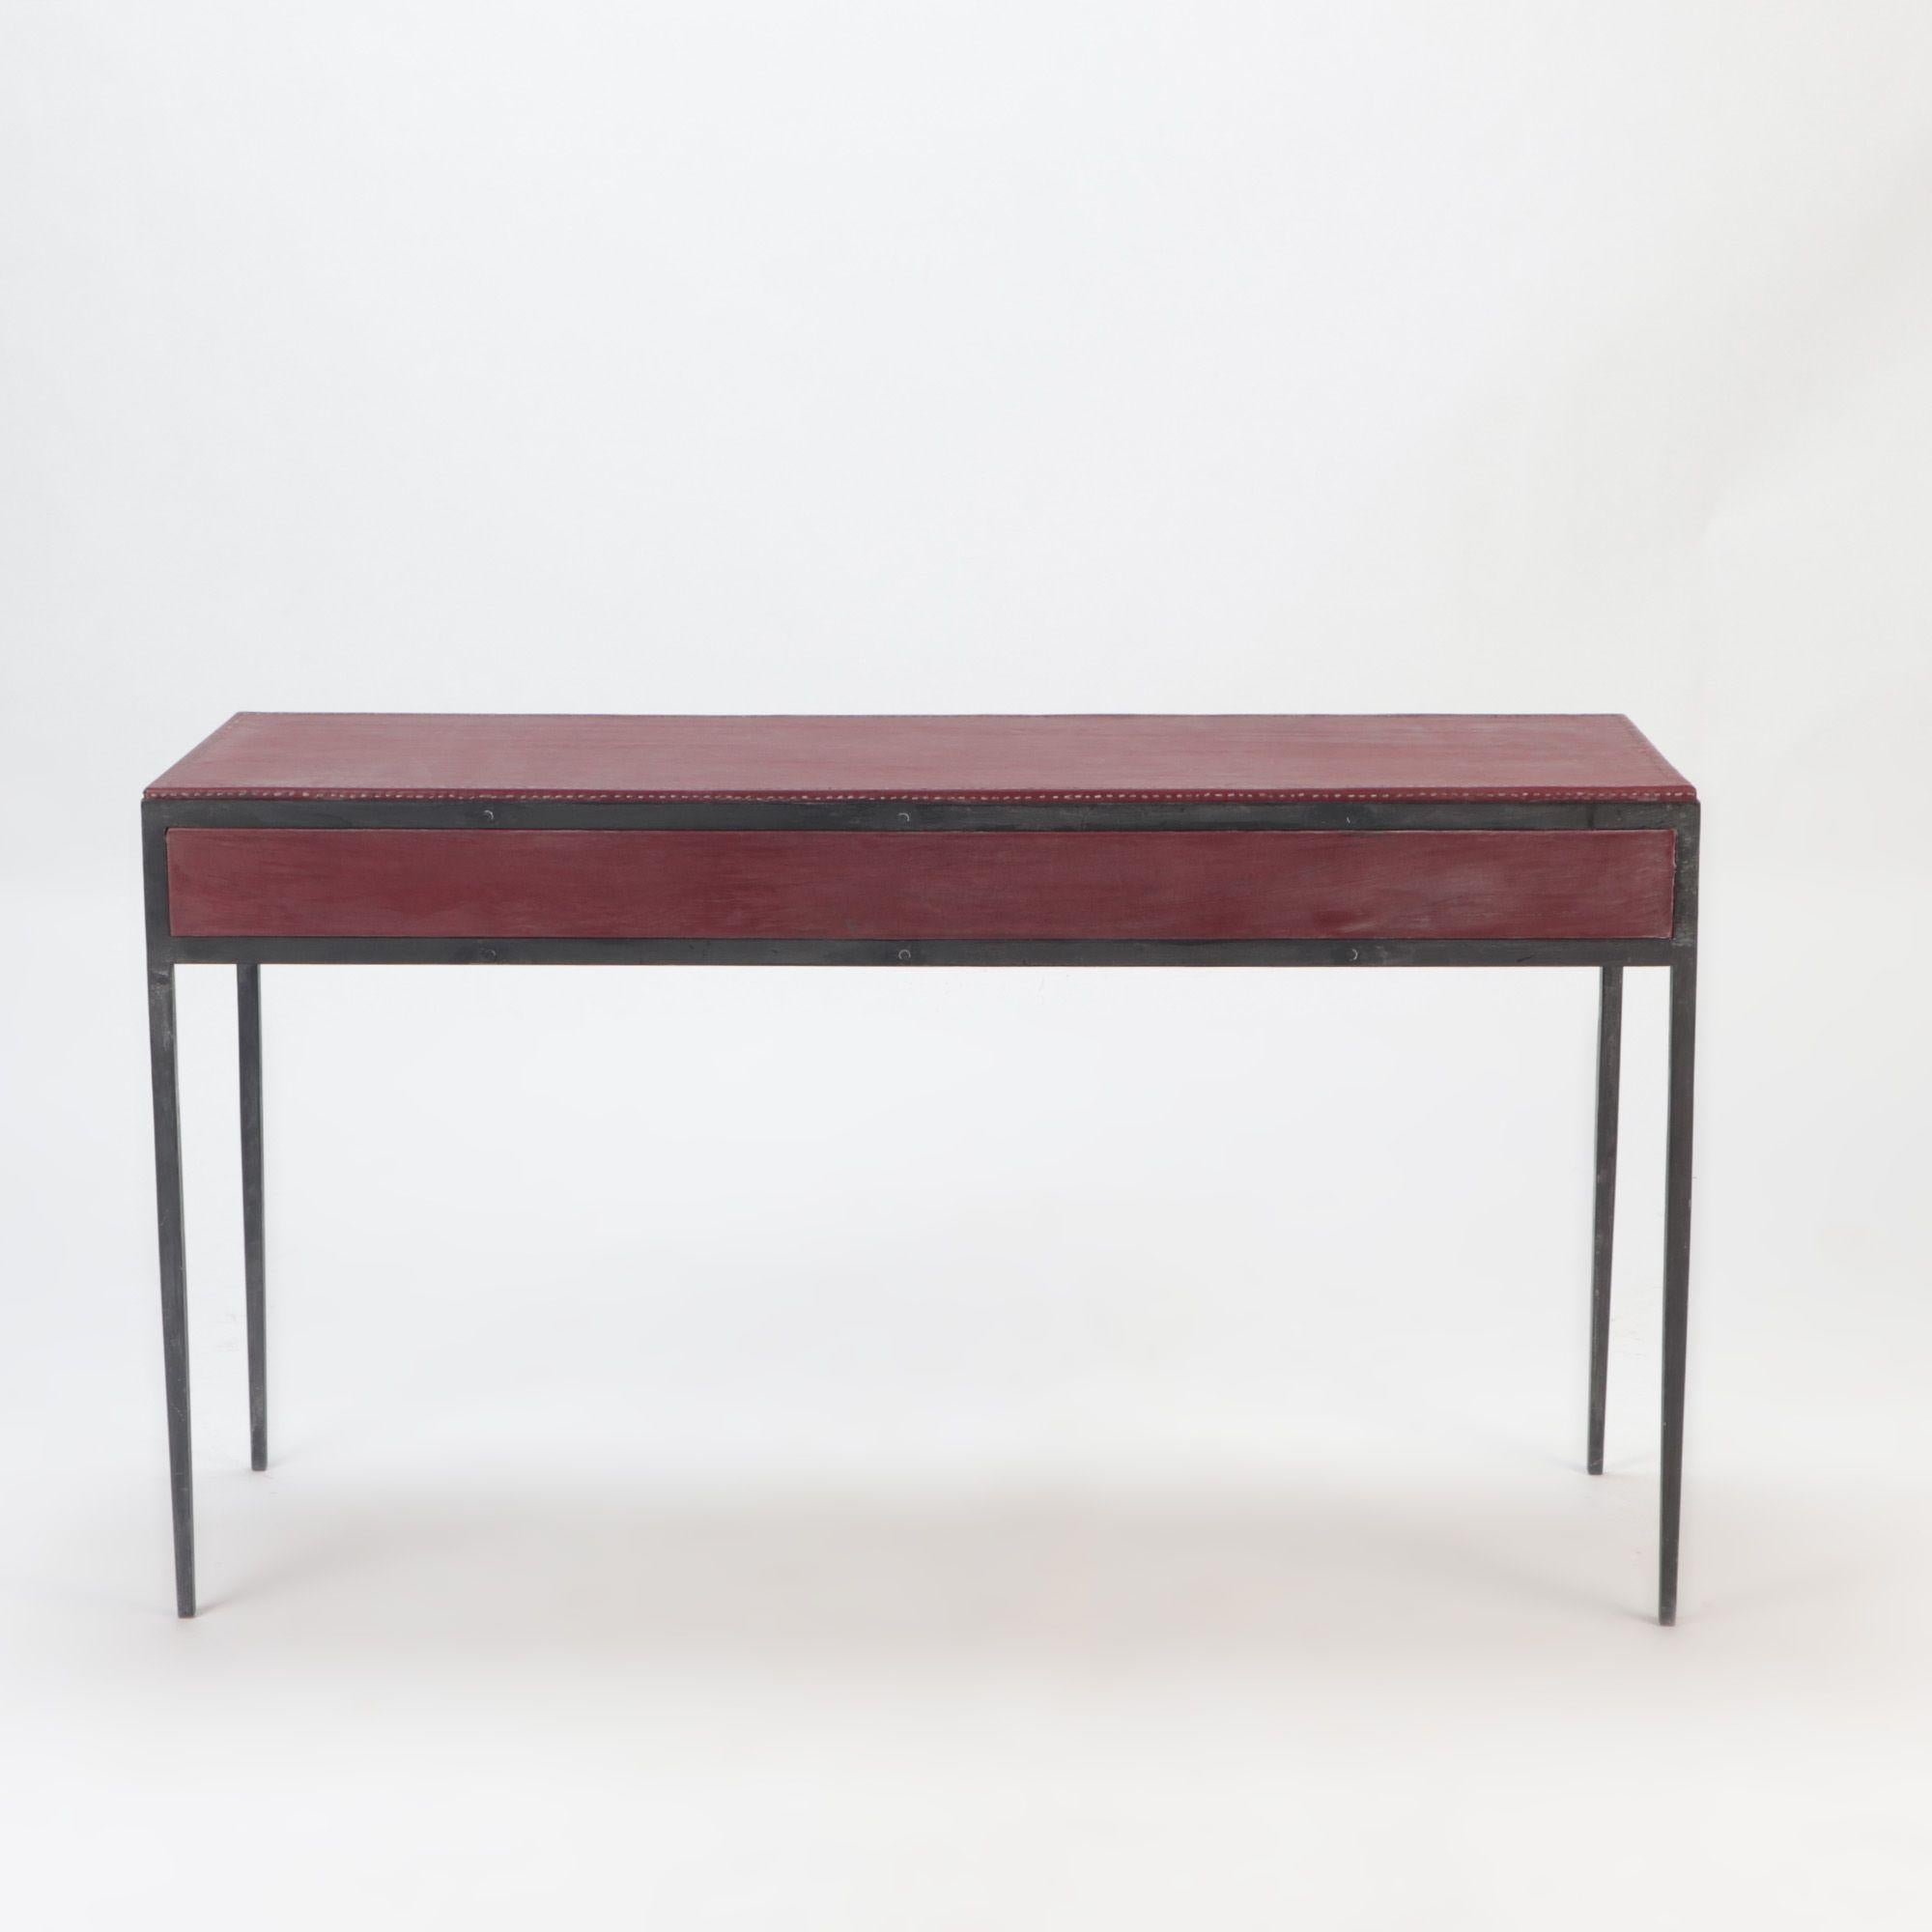 Iron and Burgundy Leather Writing Desk, Contemporary In Good Condition For Sale In Philadelphia, PA